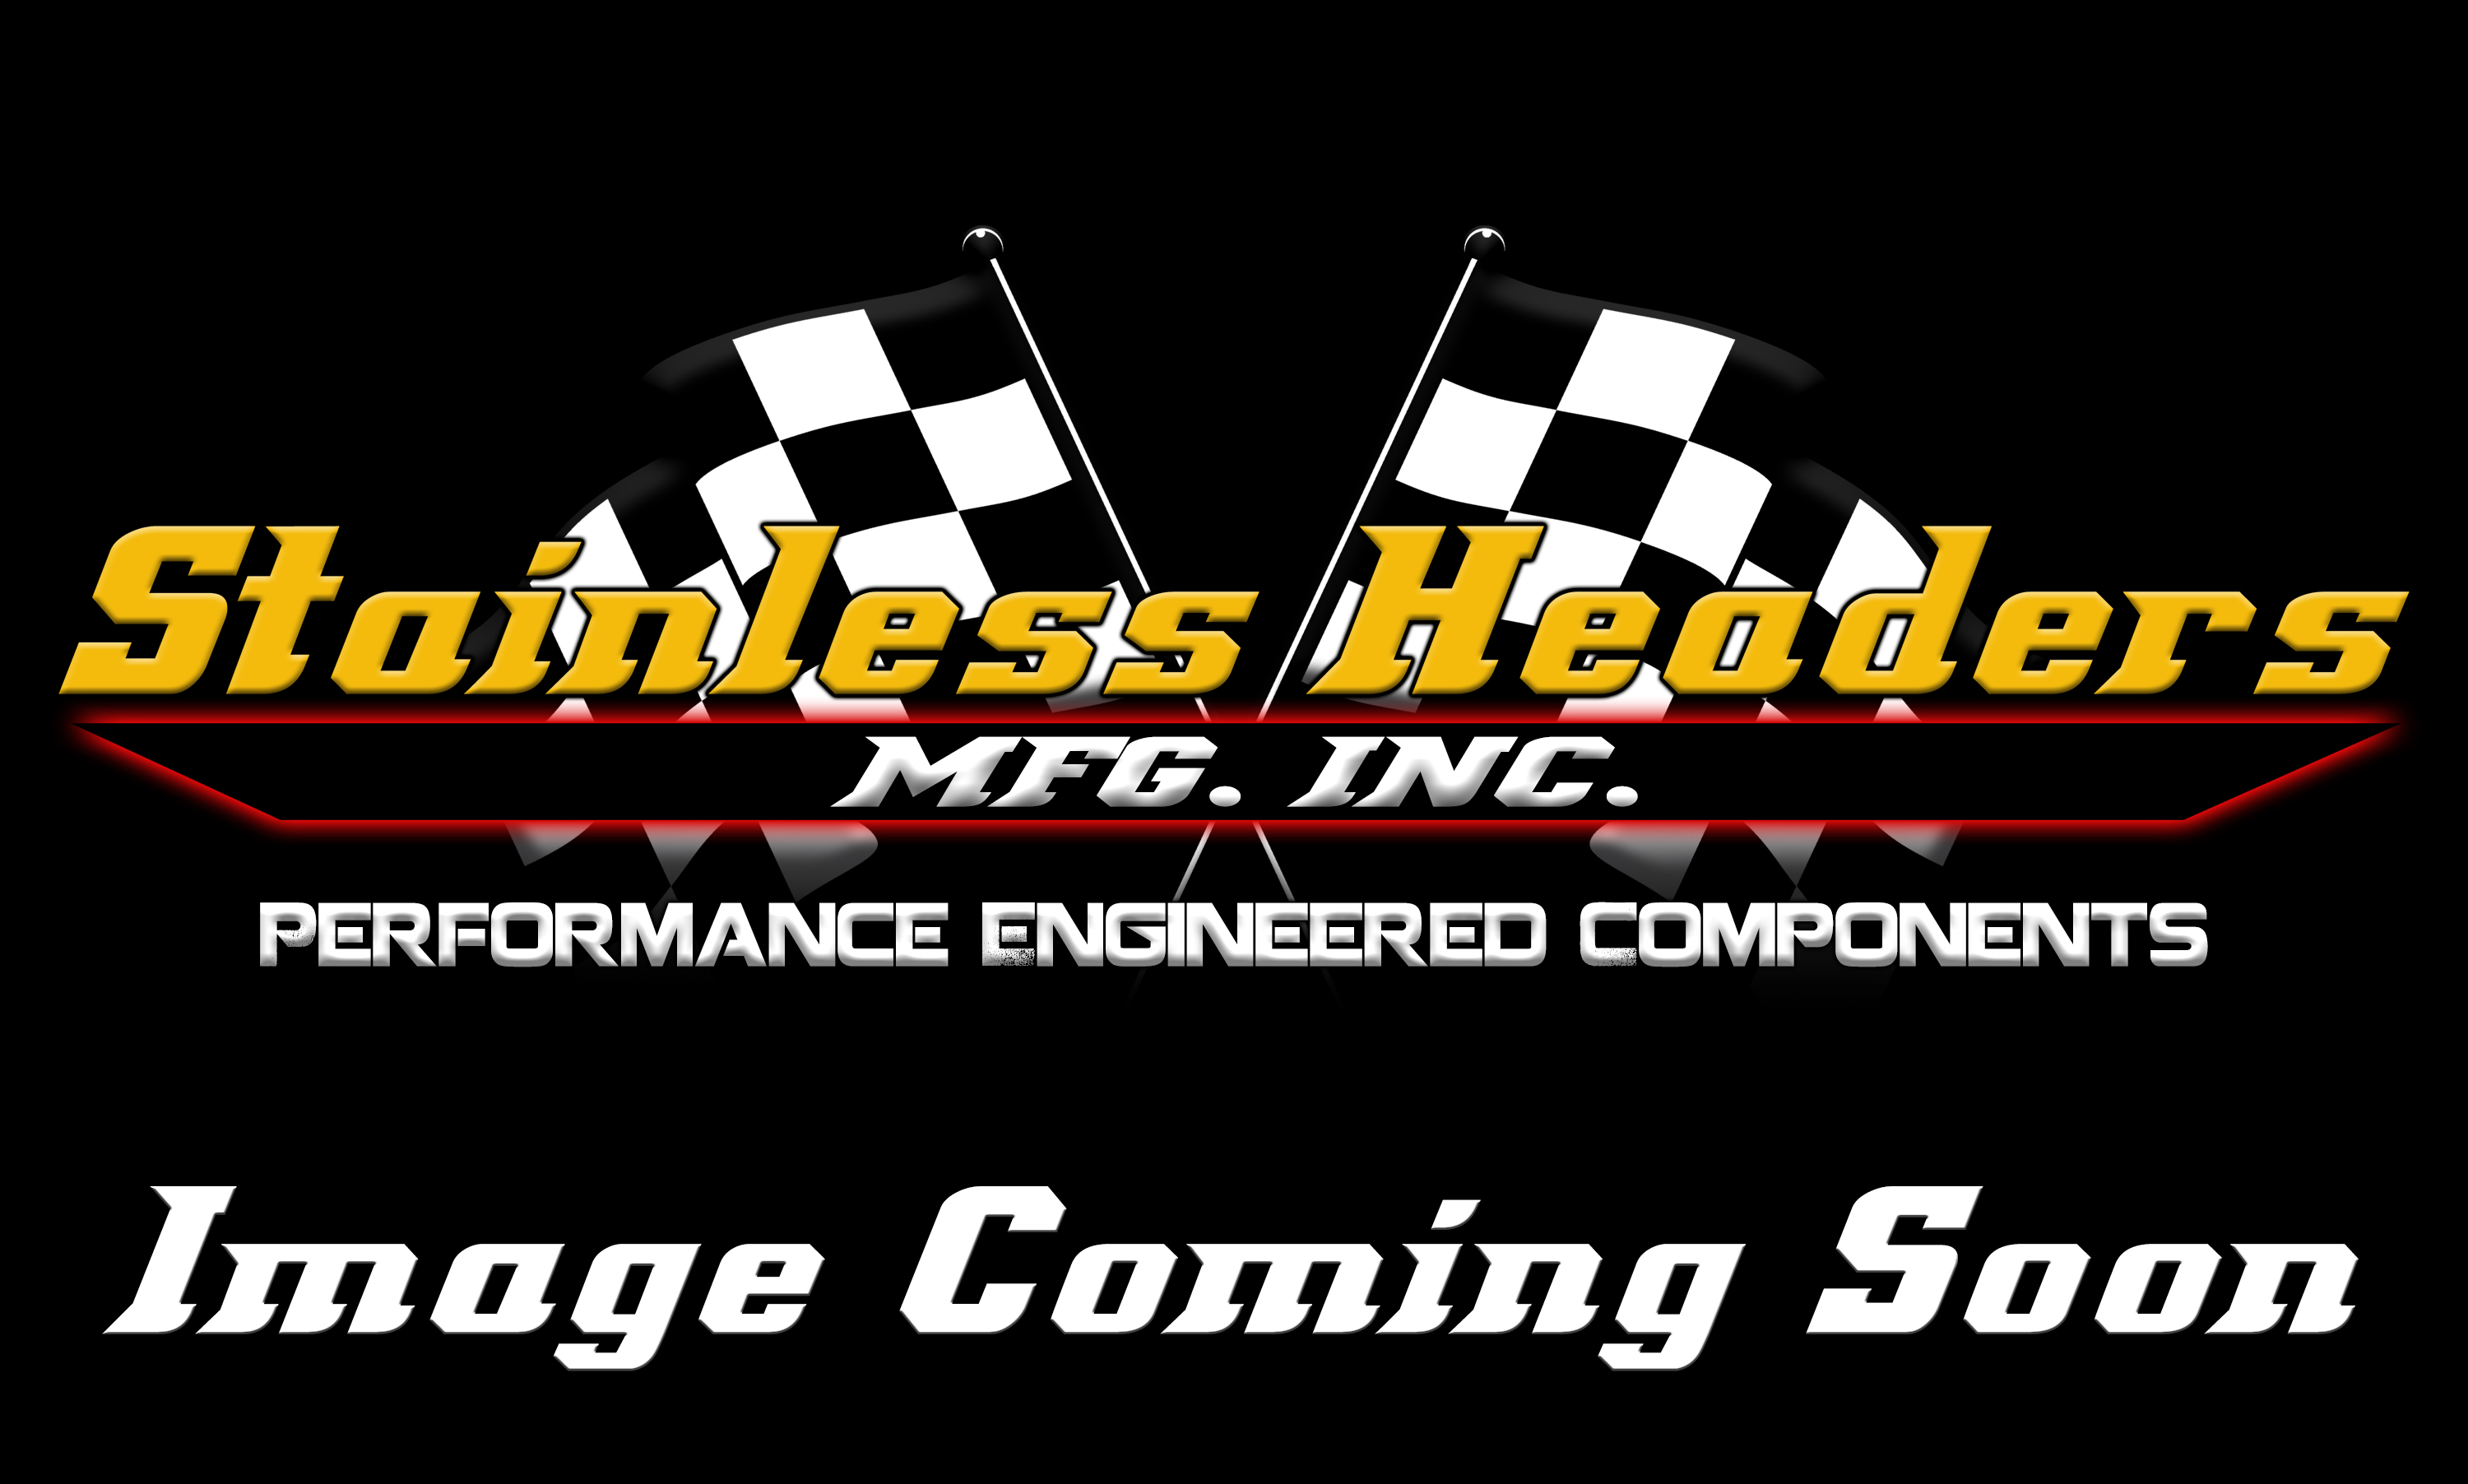 CompTurbo Technologies - CTR4204R-7490 Mid Frame Air-Cooled 1.0  Turbocharger (1300 HP)